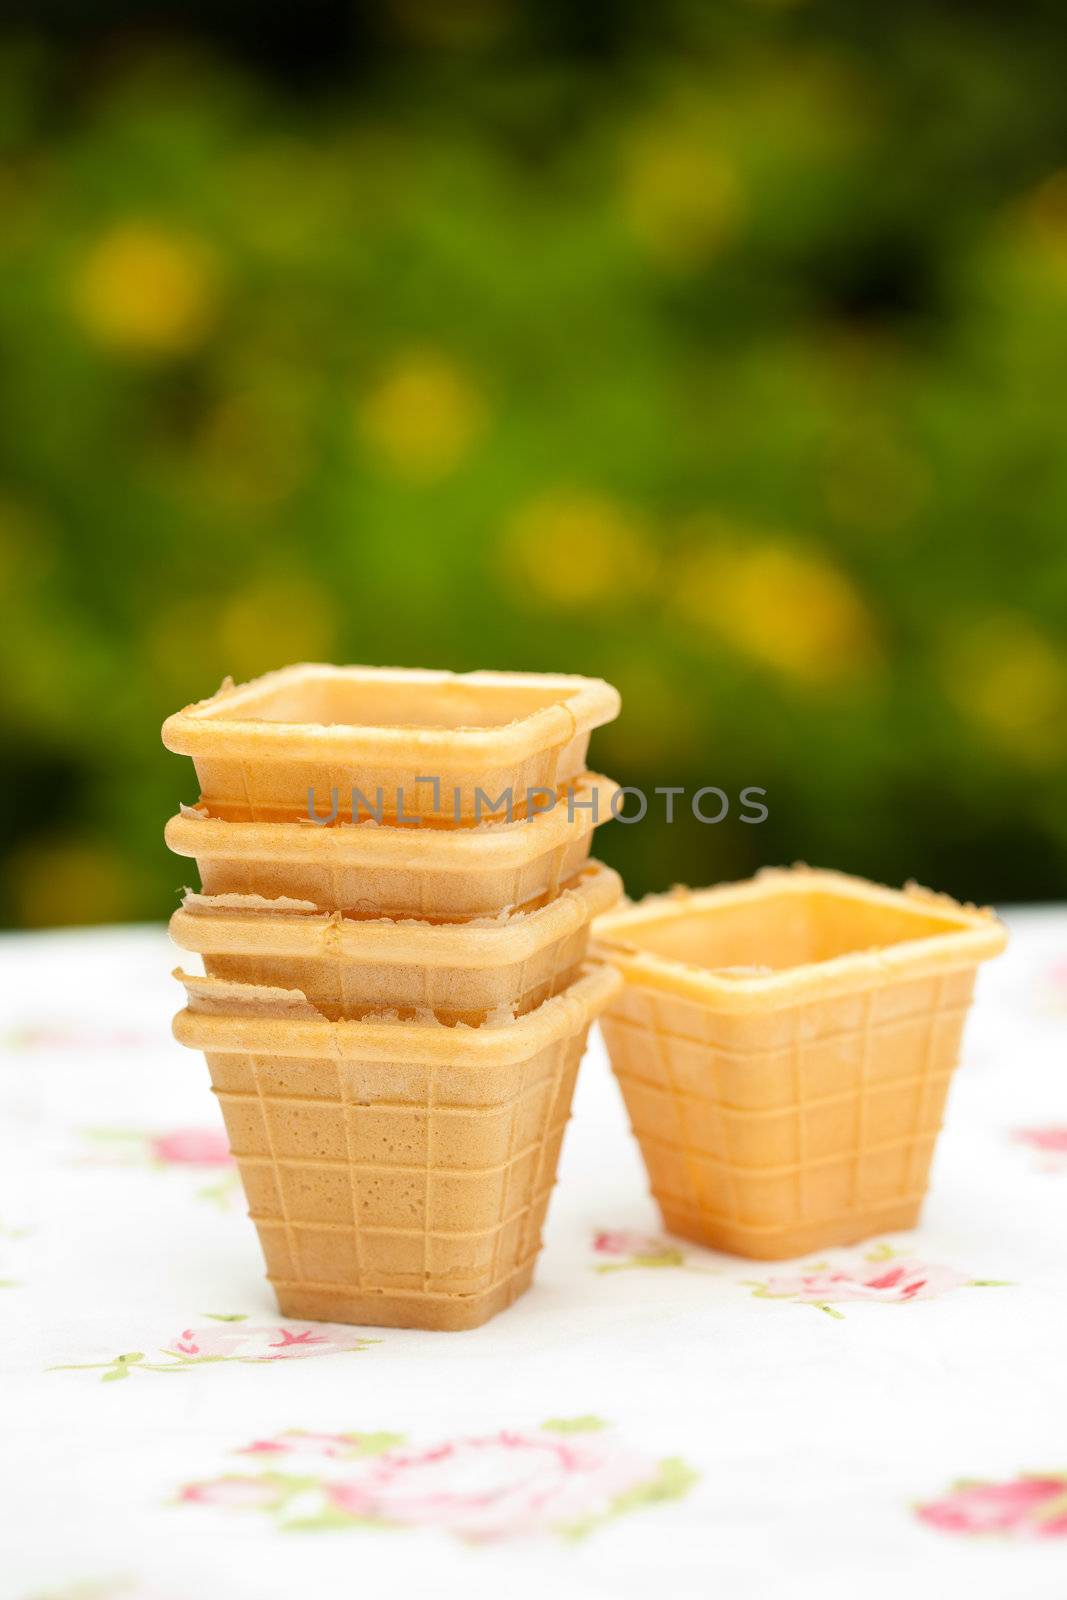 Square icecup holders by Fotosmurf